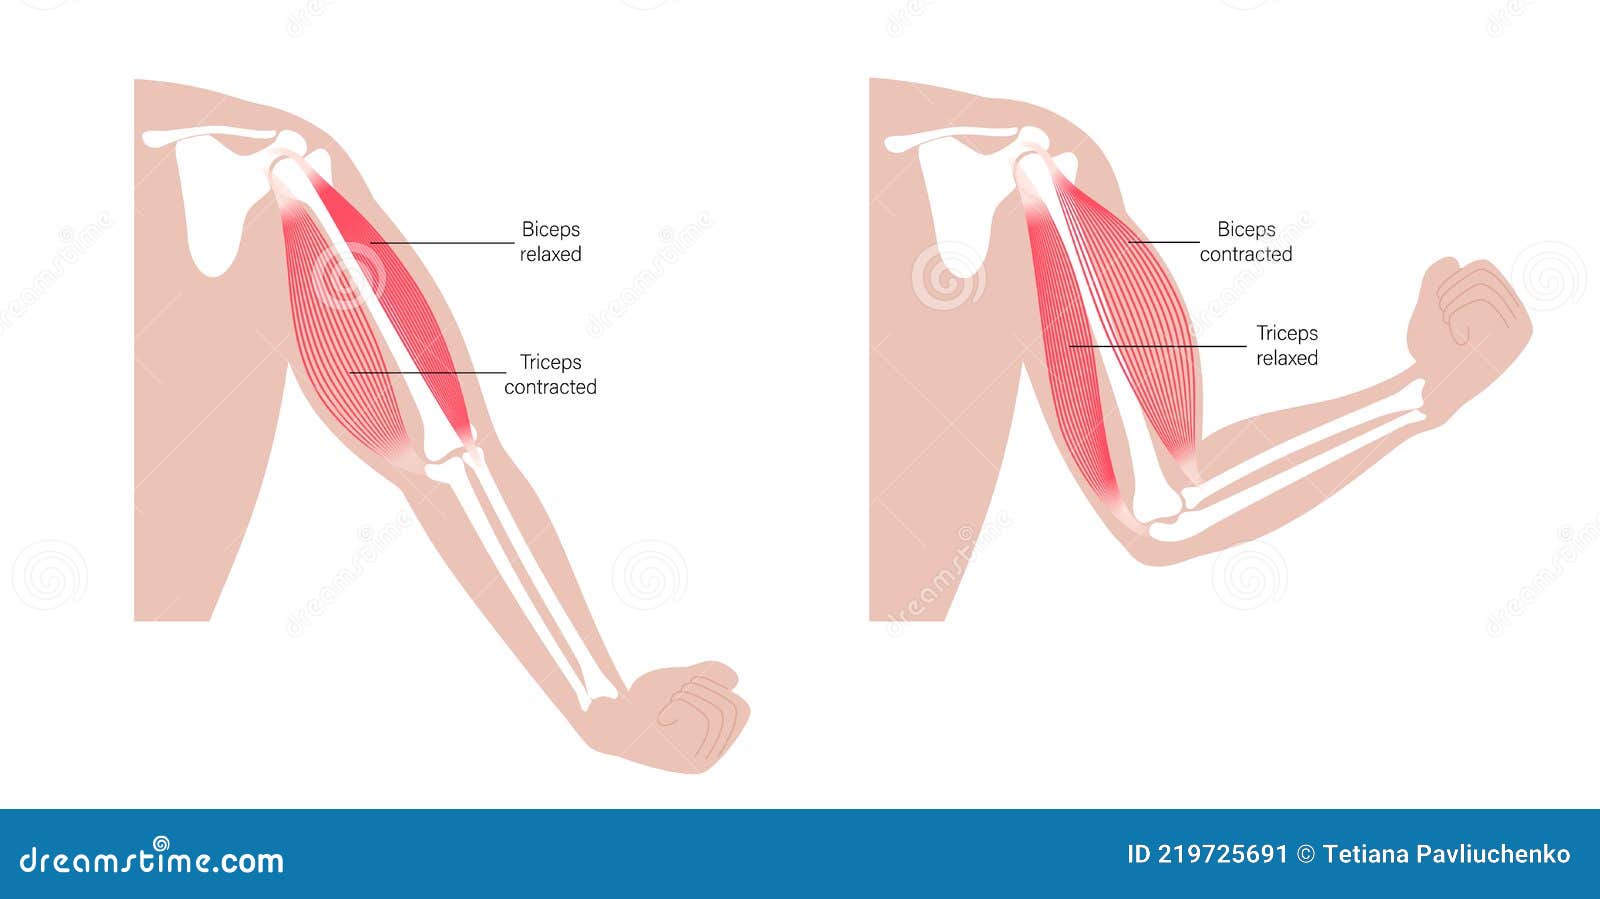 Biceps and triceps anatomy stock vector. Illustration of biology - 219725691